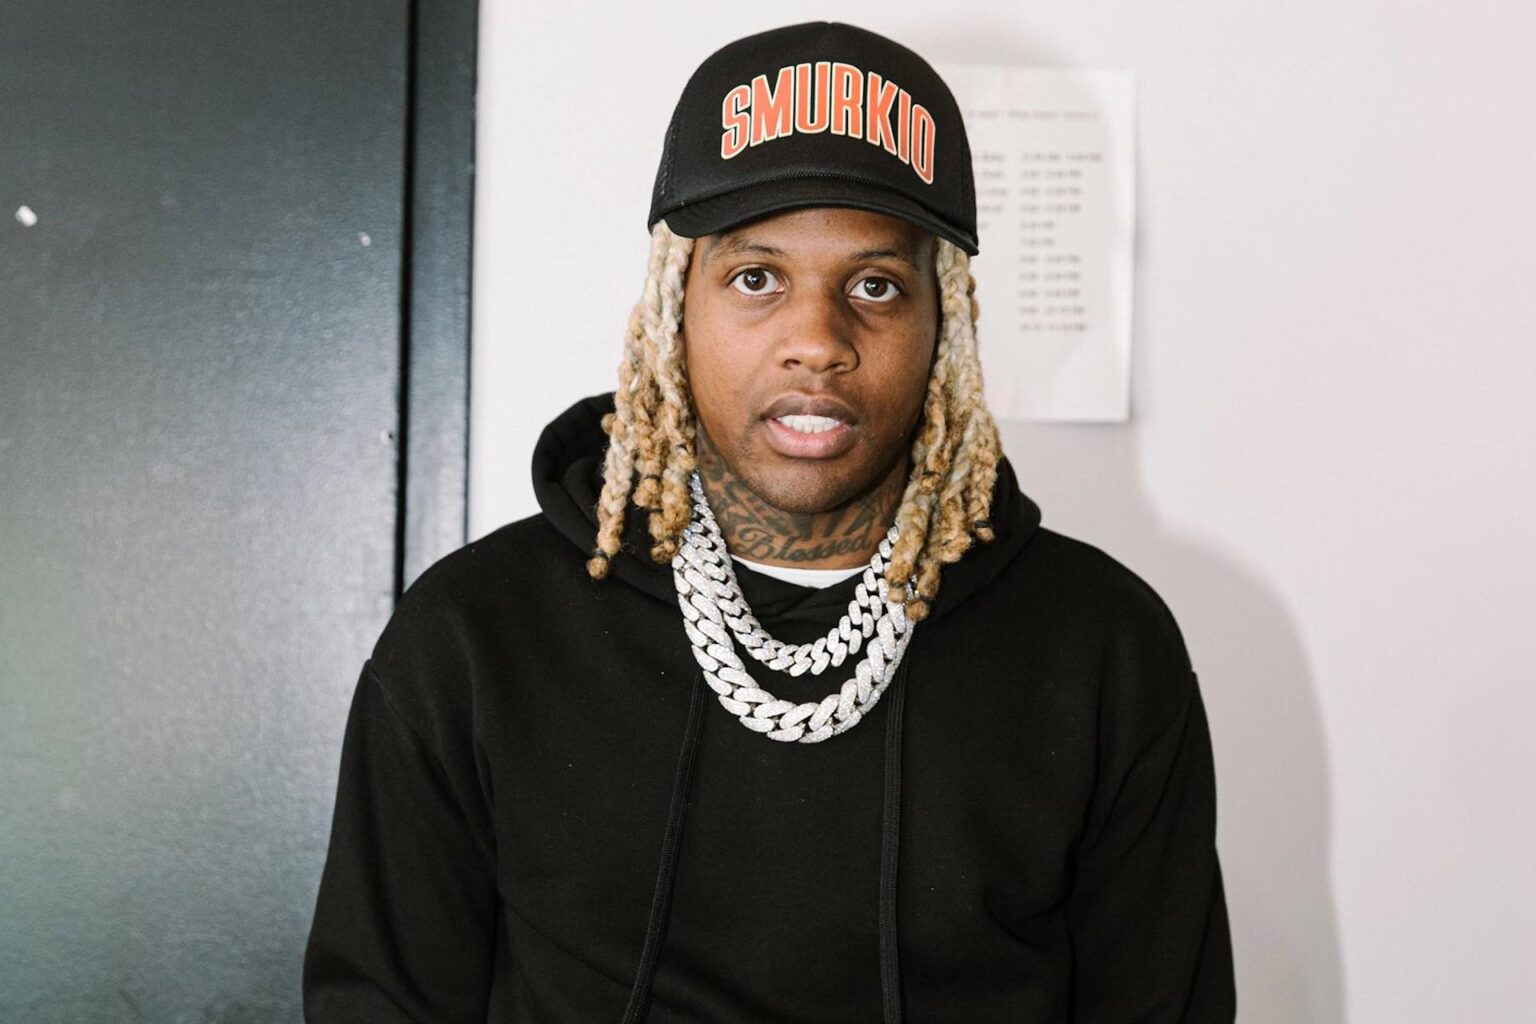 Famous Rappers are some of the most well-paid celebs. Here's a closer look at Lil Durk's net worth and the highest-paid rappers of this year.